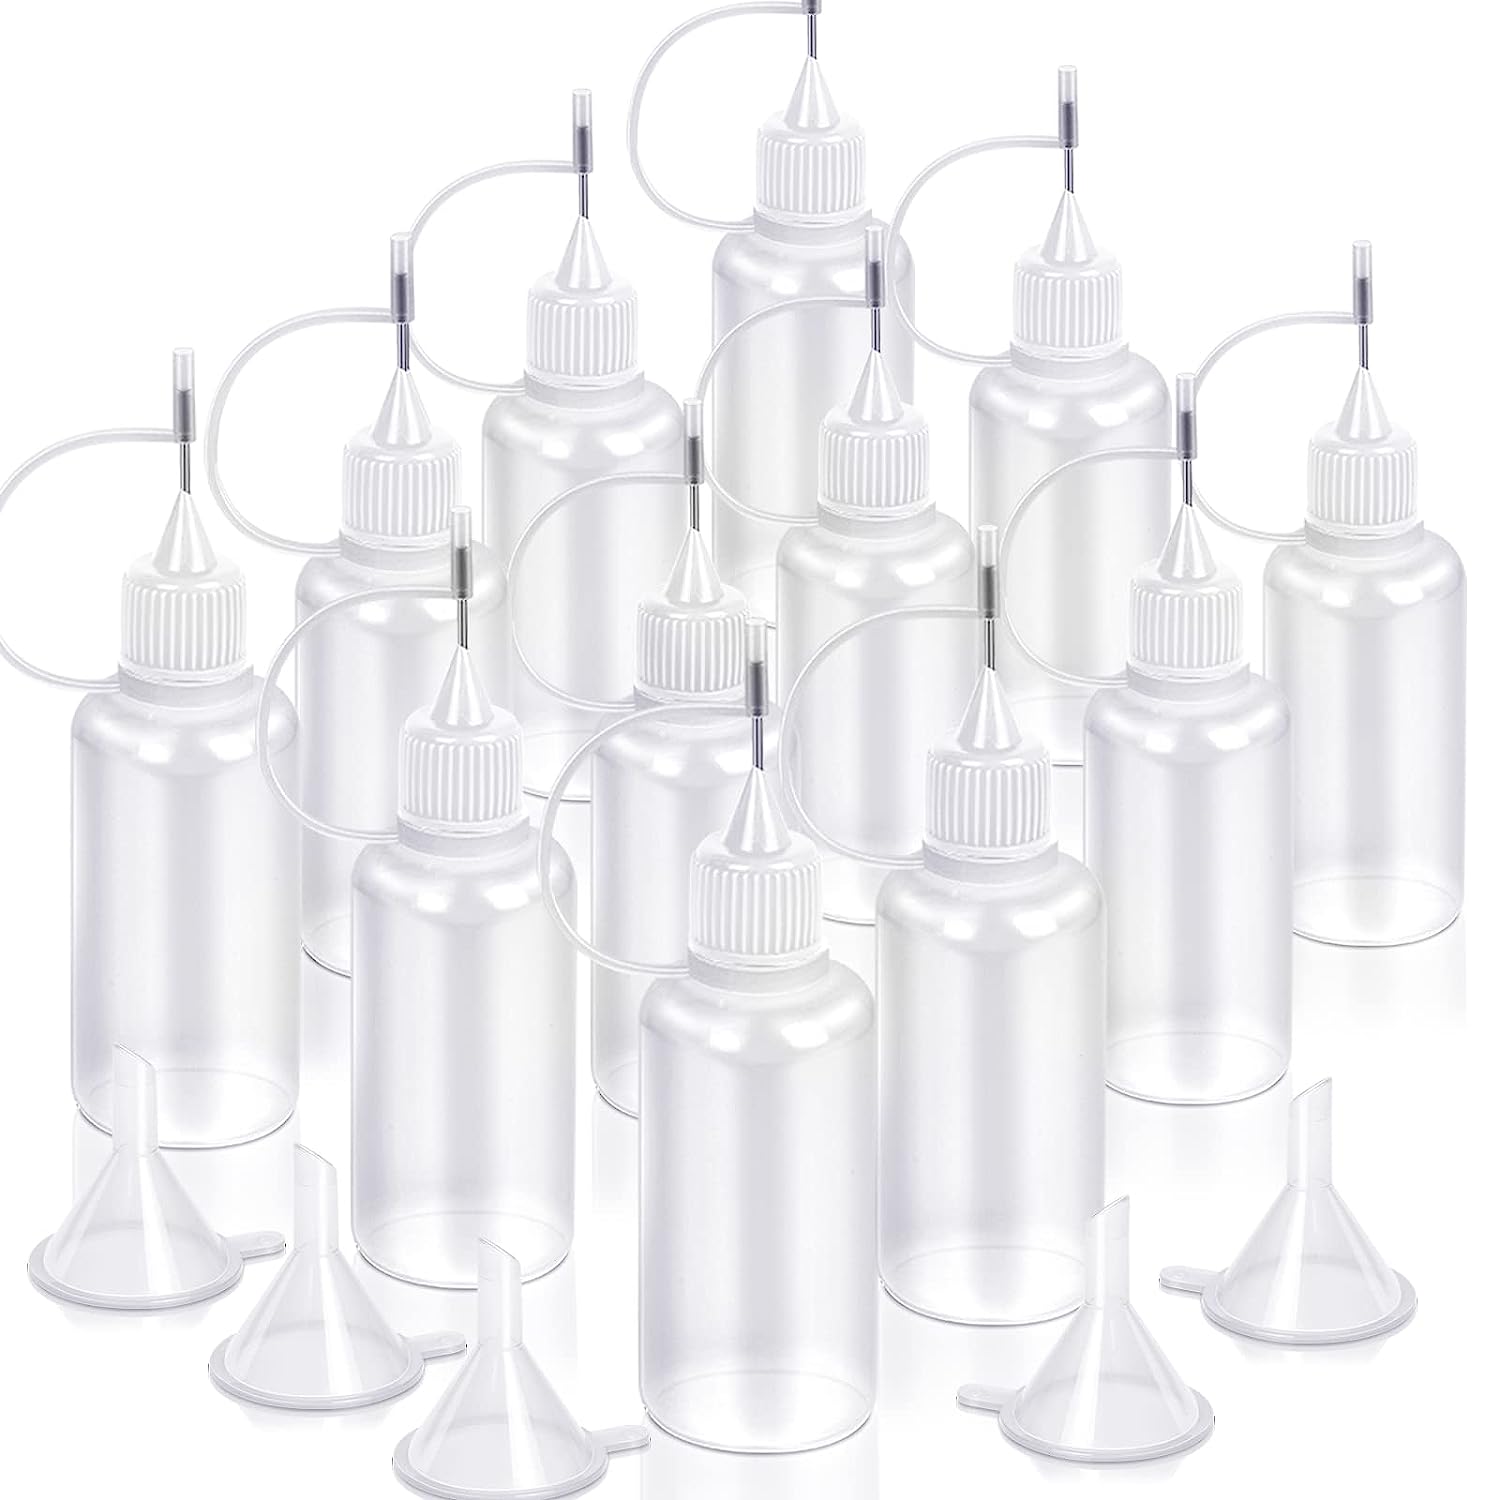 10pcs 30ml Plastic Squeezable Tip Applicator Refillable Dropper Bottles  With Needle Tip Caps For Gl